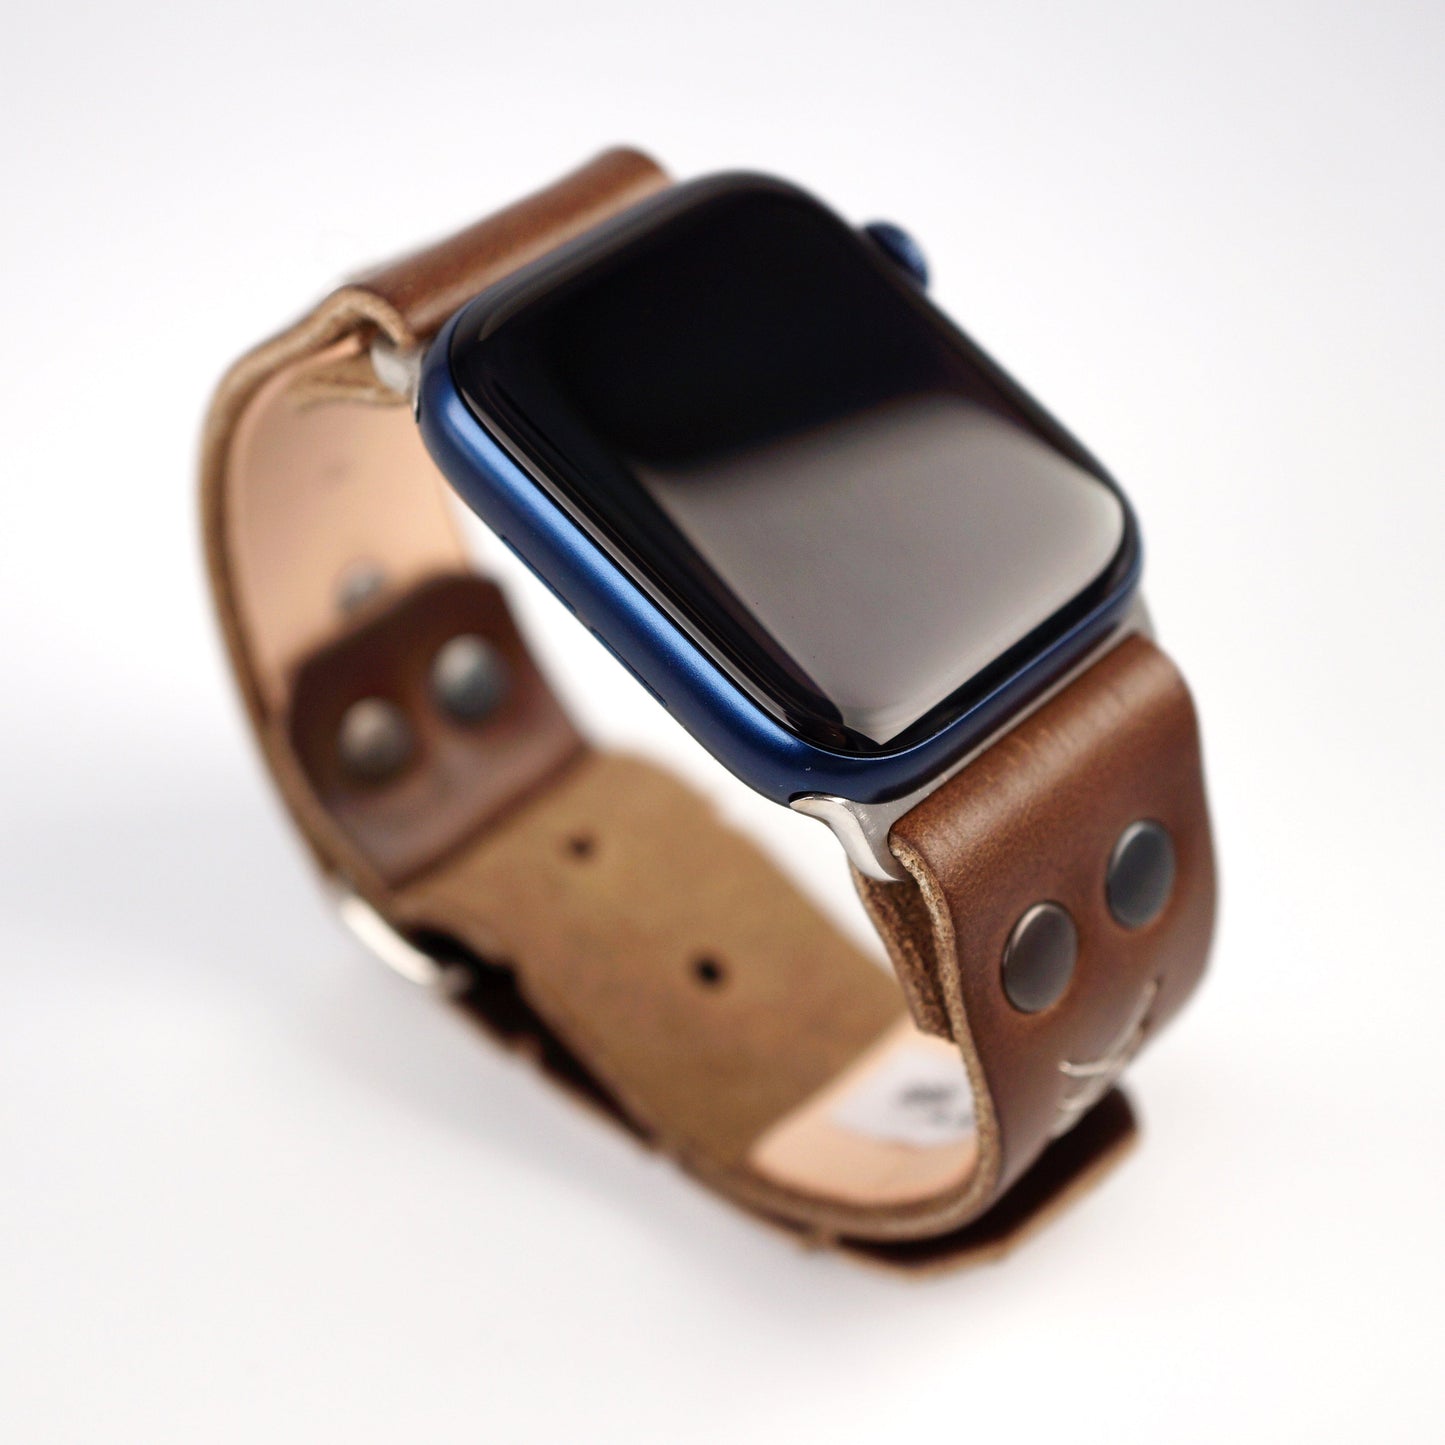 Apple Watch Band - Trout 2.0